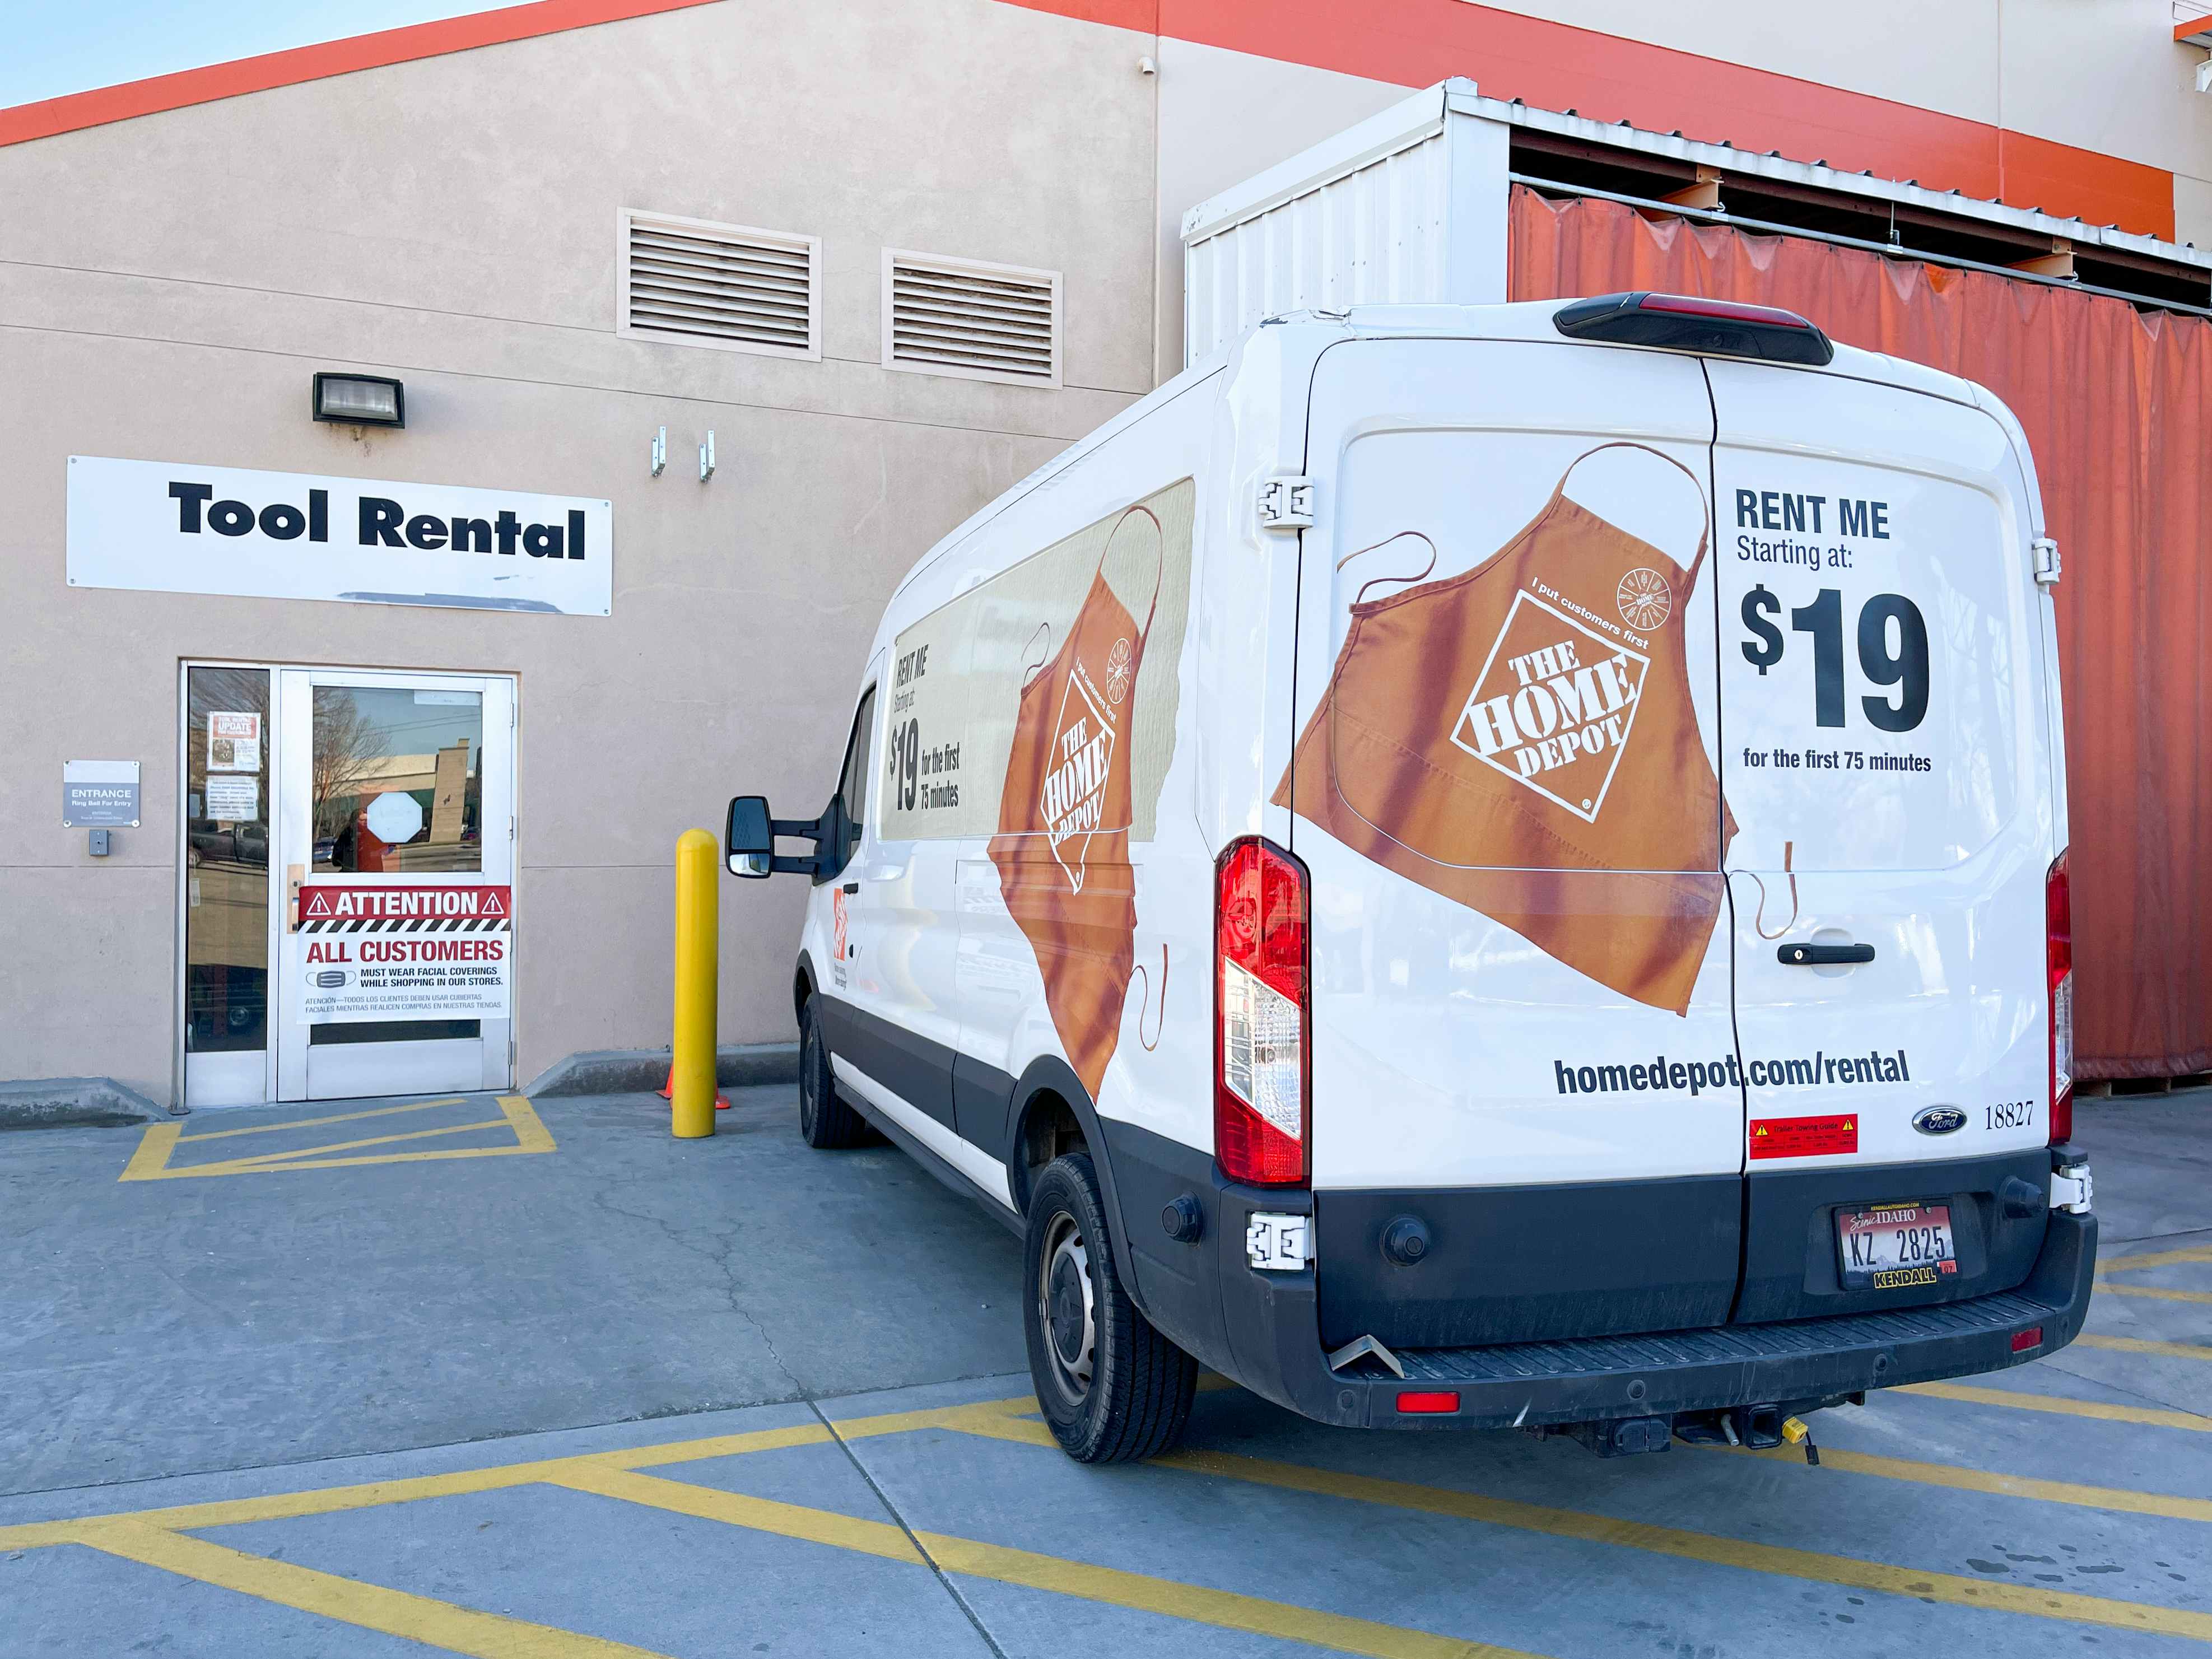 A Rent Me van parked in front of The Home Depot tool rental entrance